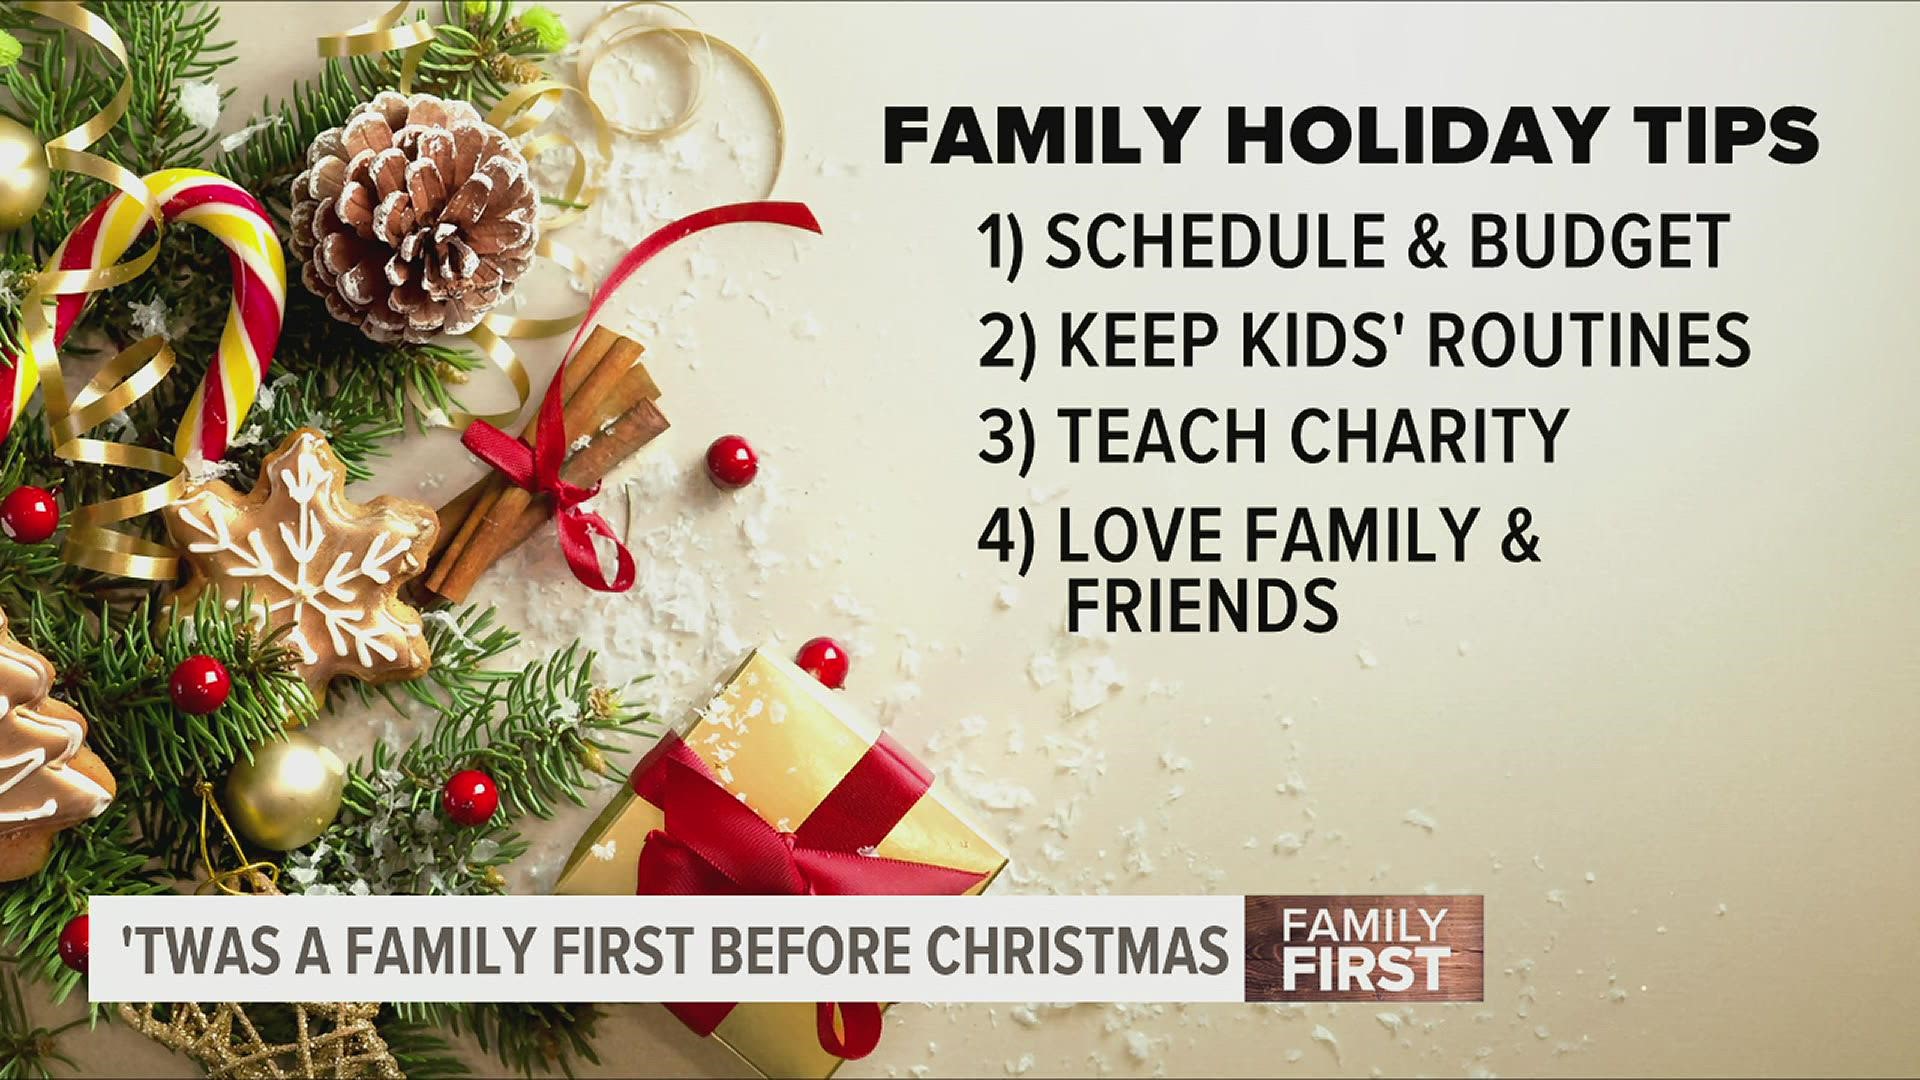 The holidays can be stressful, but these four easy tips to keep your family first may help make the season easier.